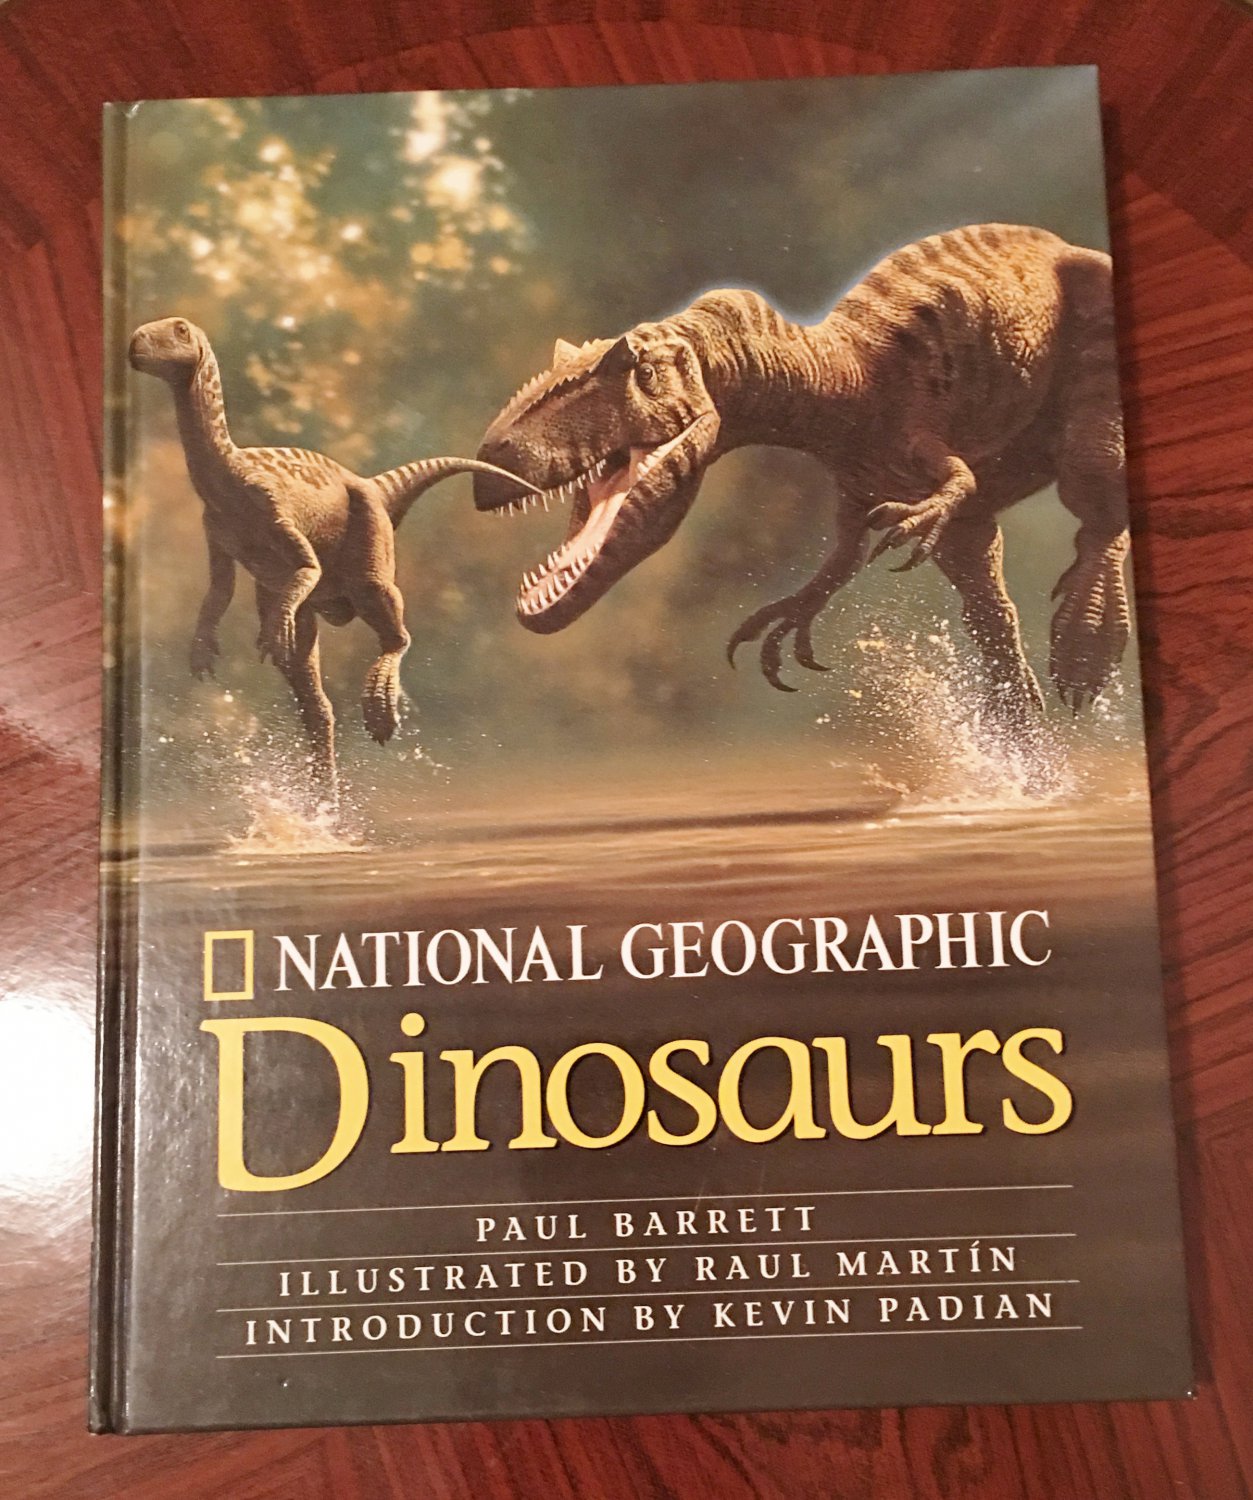 New NATIONAL GEOGRAPHIC DINOSAURS Hard Cover Coffee Table Book ...